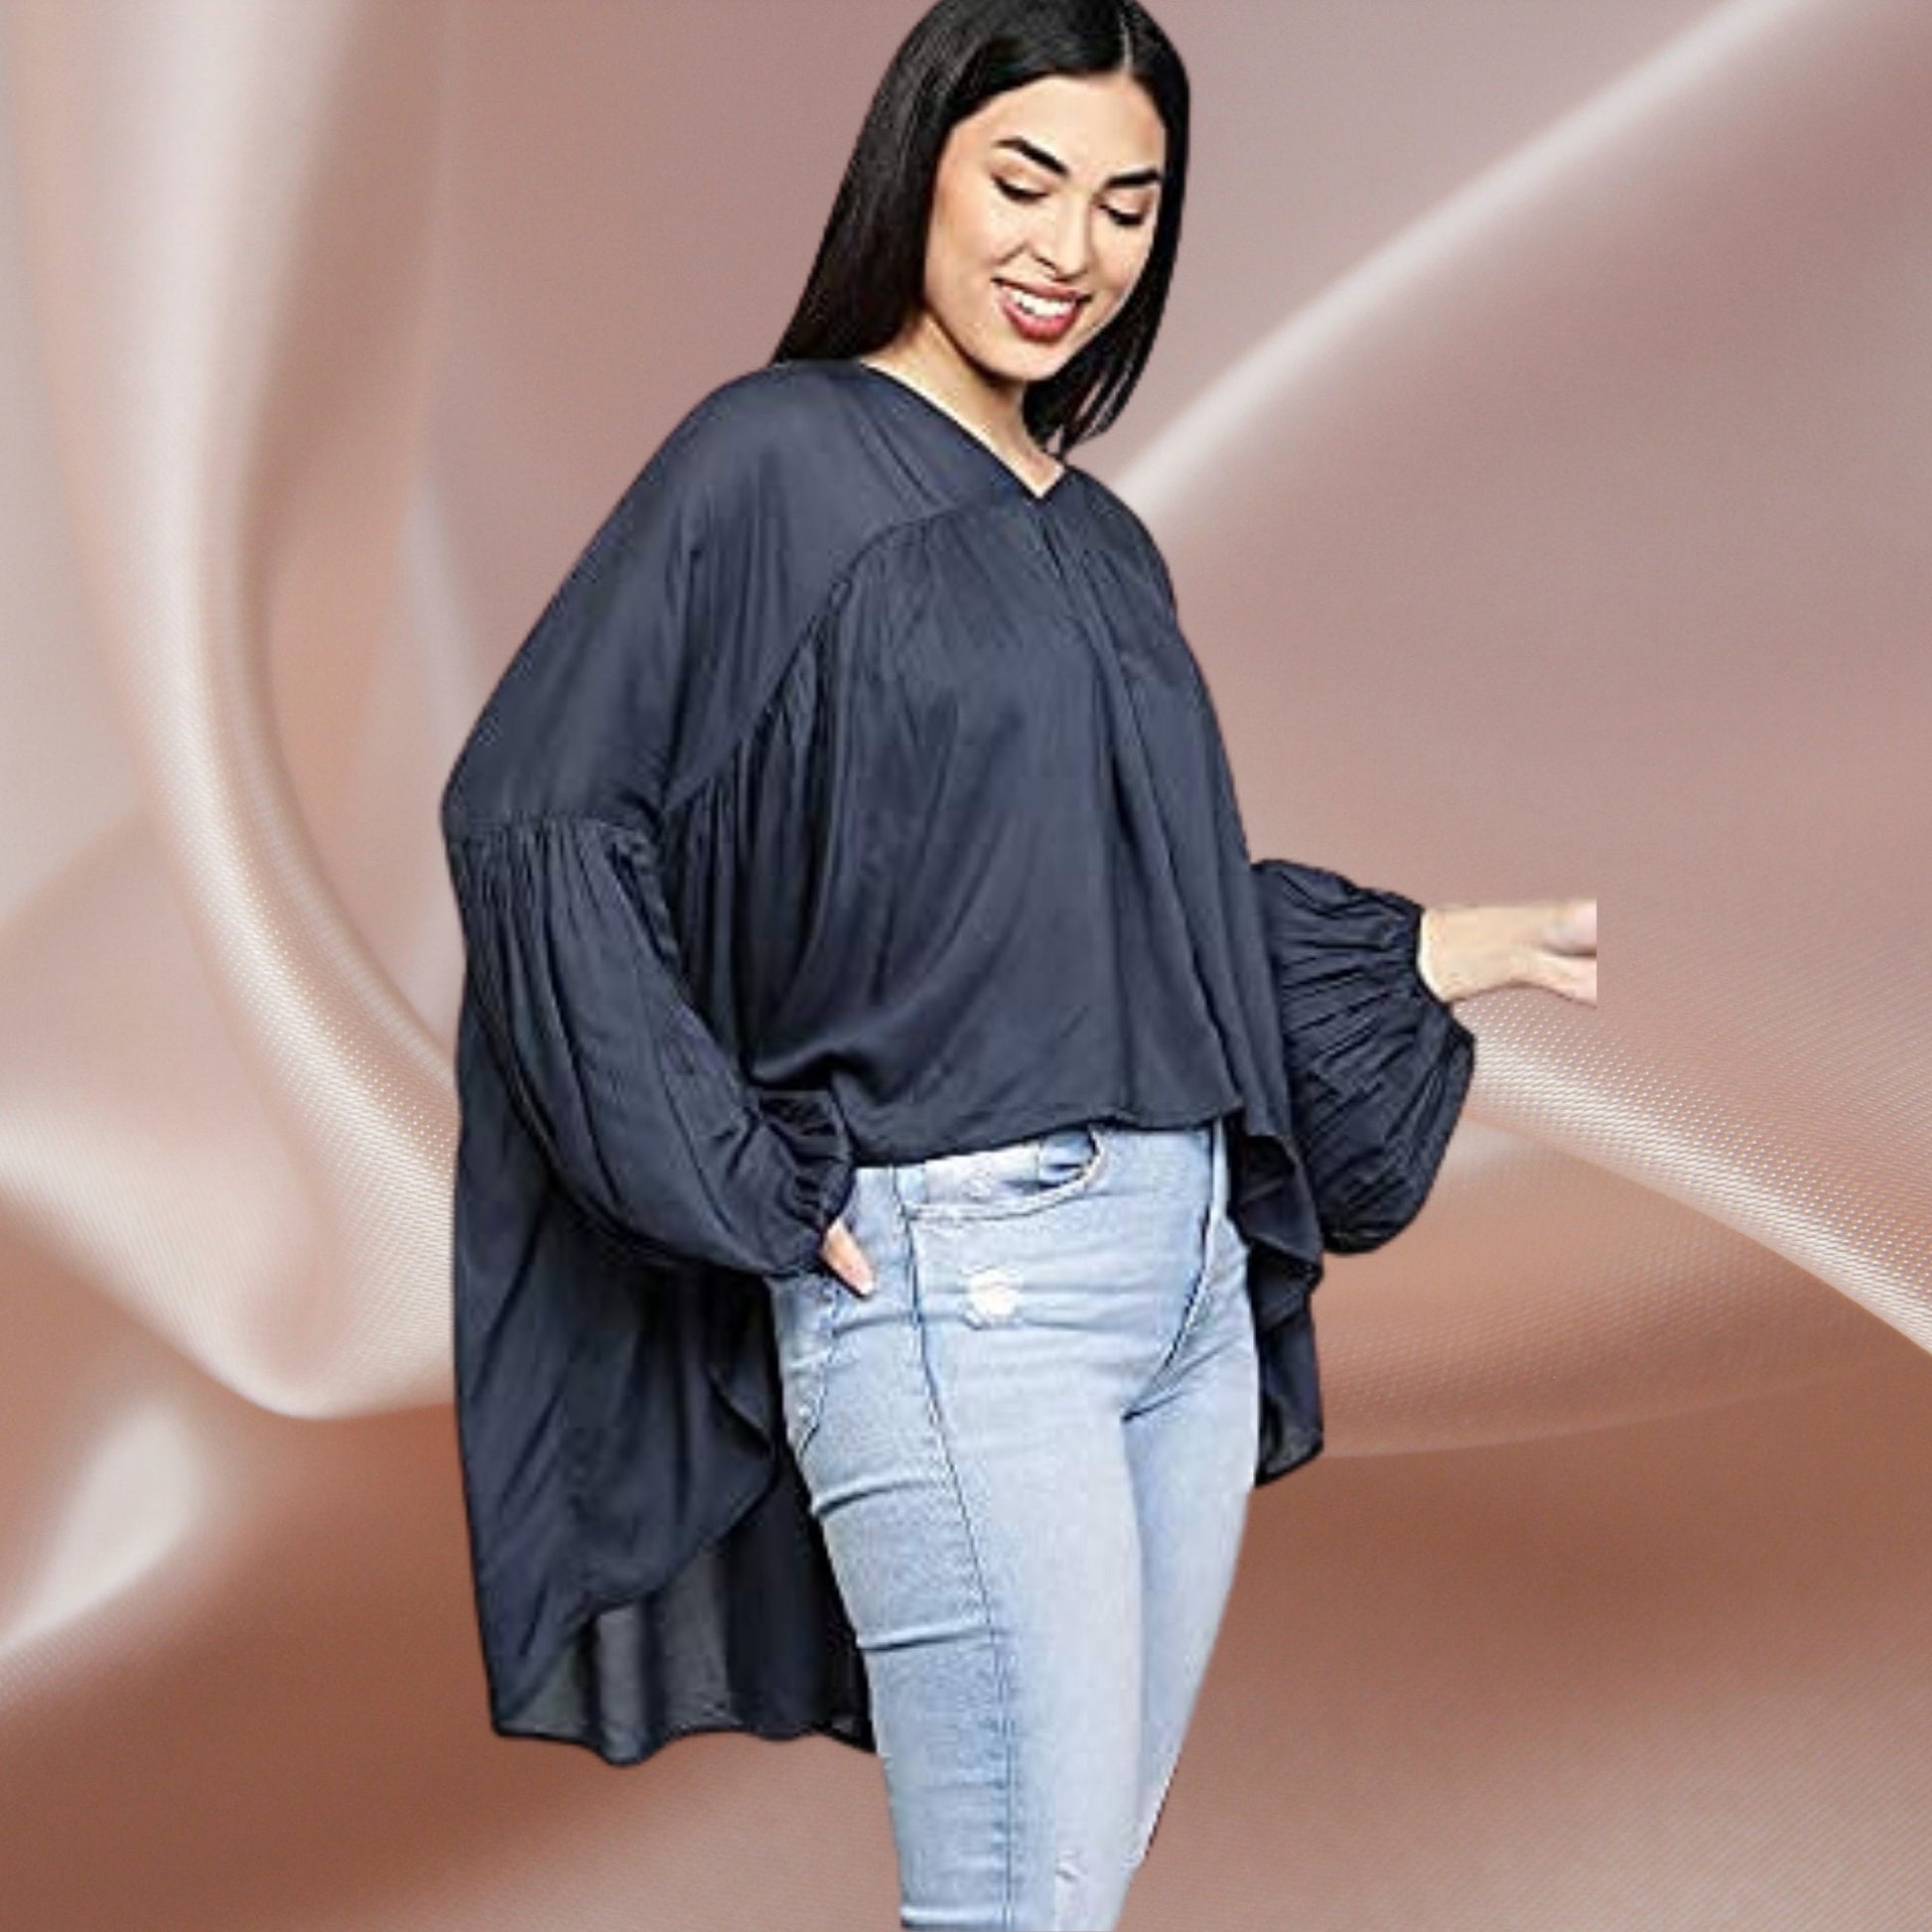 women_blue_top  women's_top  women's_cotton_top  Top_for_Women  stylish_blouse  spring_summer_top  over_sized_top  one_size_top  long_puff_sleeves  gathers_top  designer_top  cotton_viscose_top  cotton_tops  comfortable_top  Casual_women's_Top  Blue_top